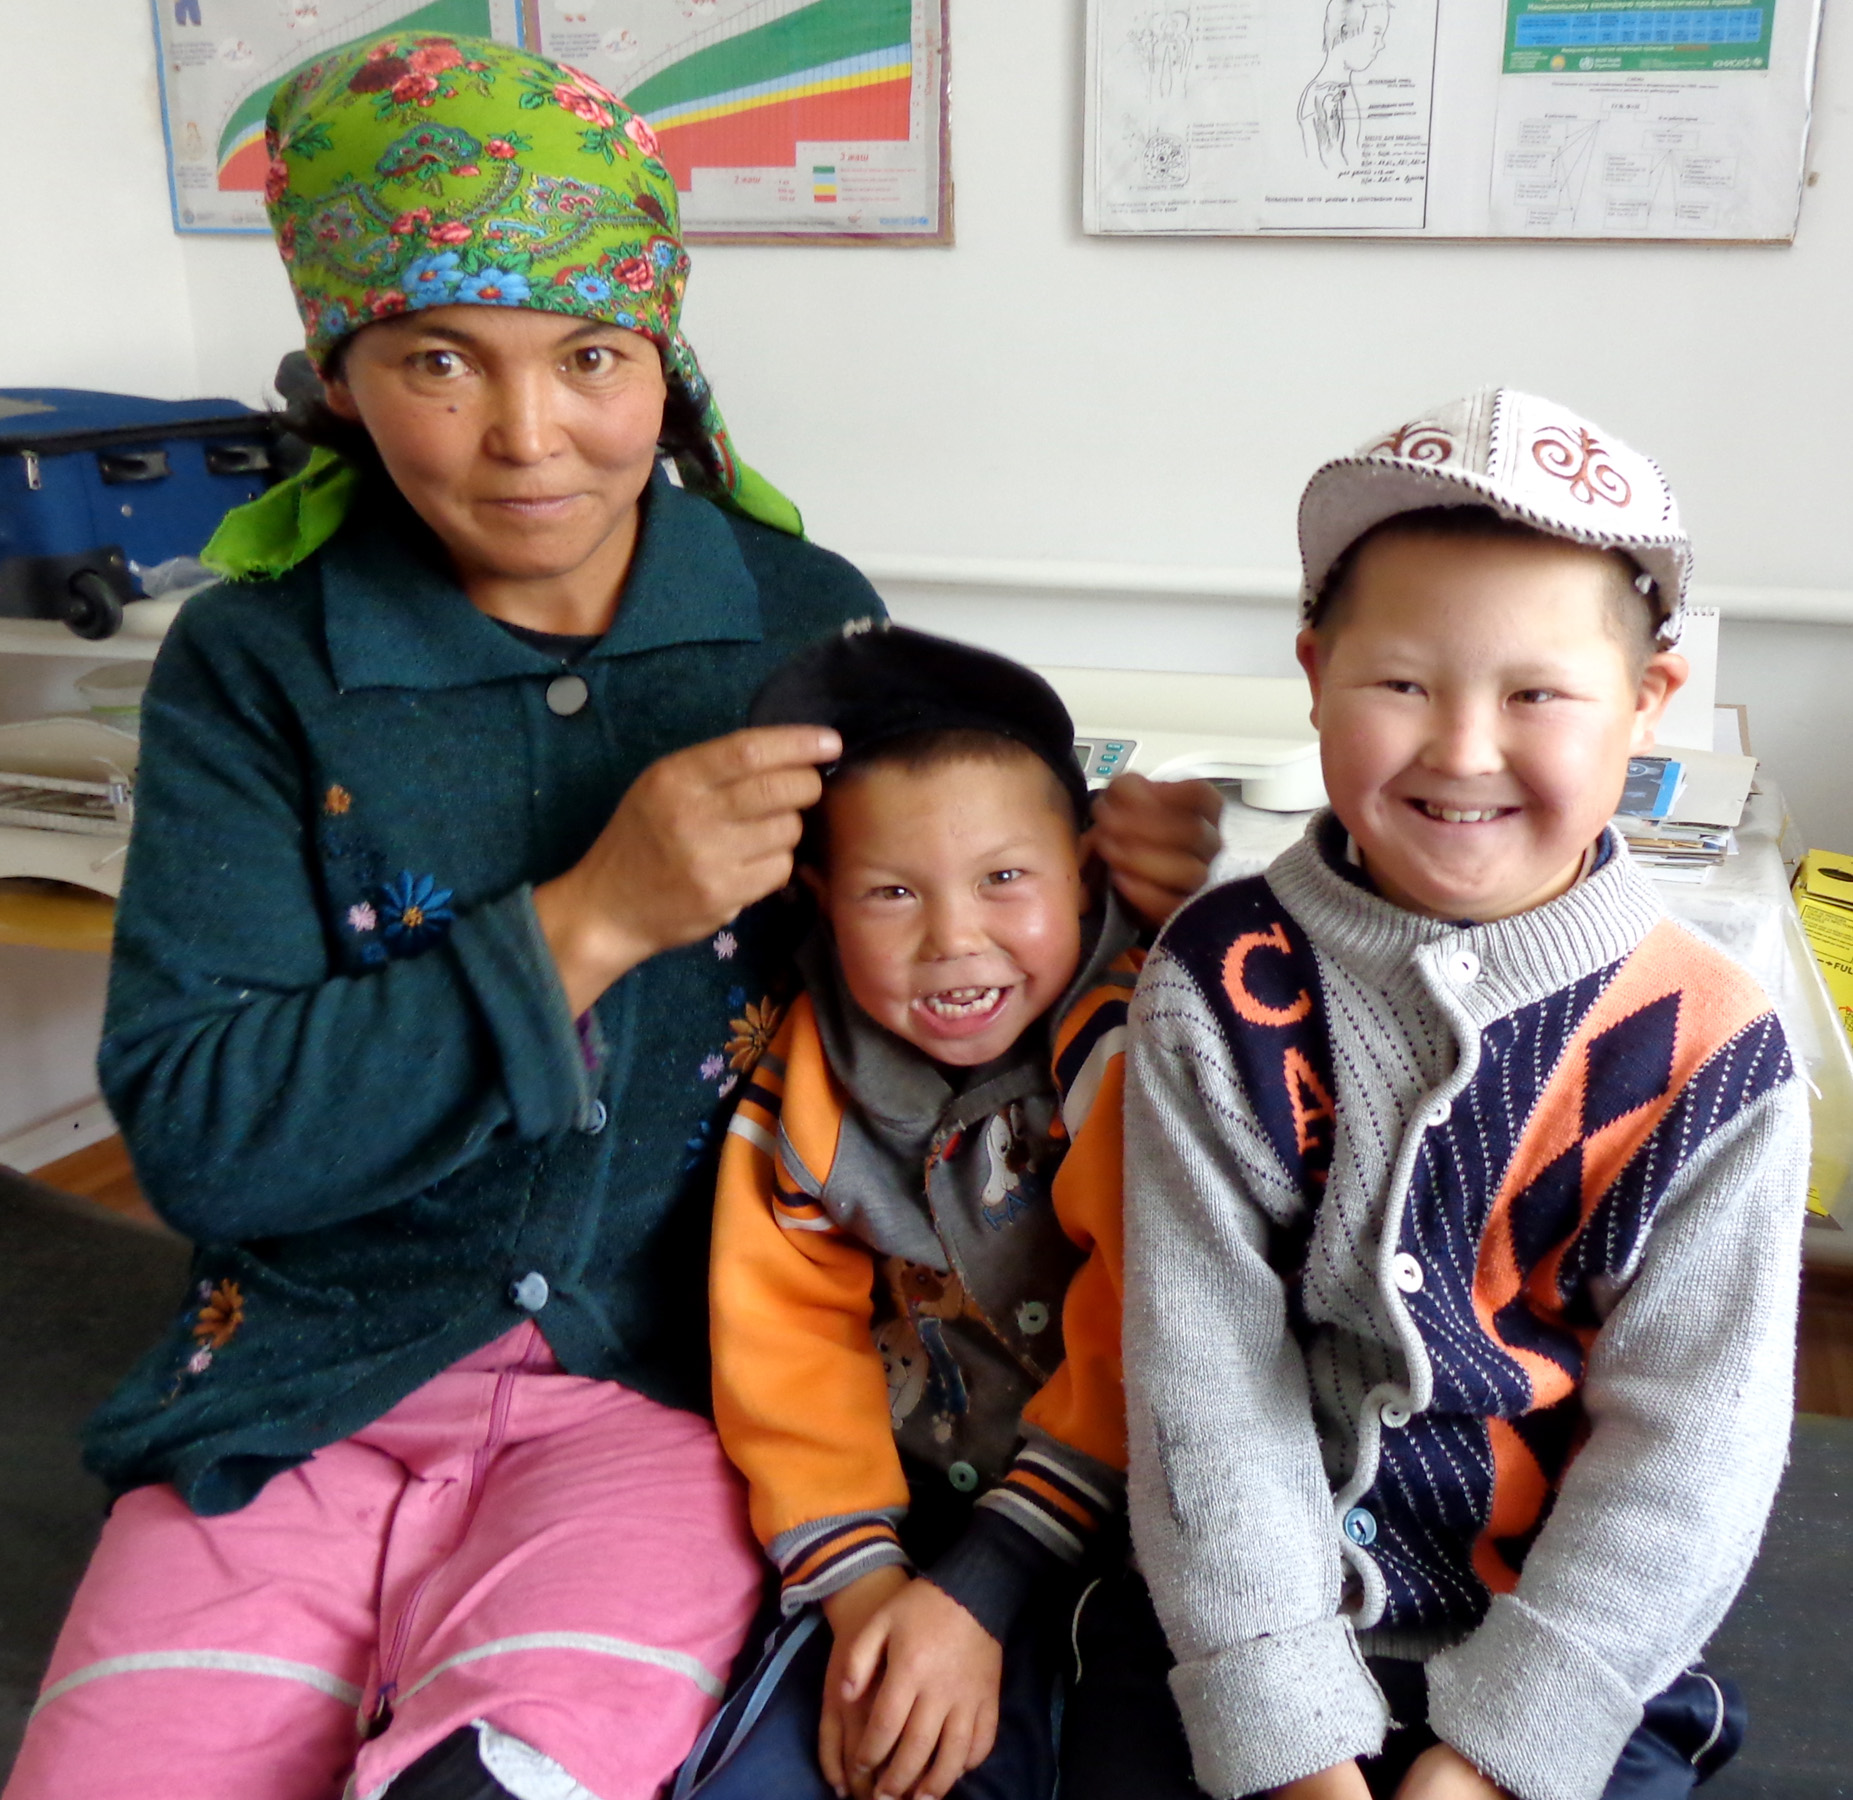 Young patients seen by the medical caravan team.